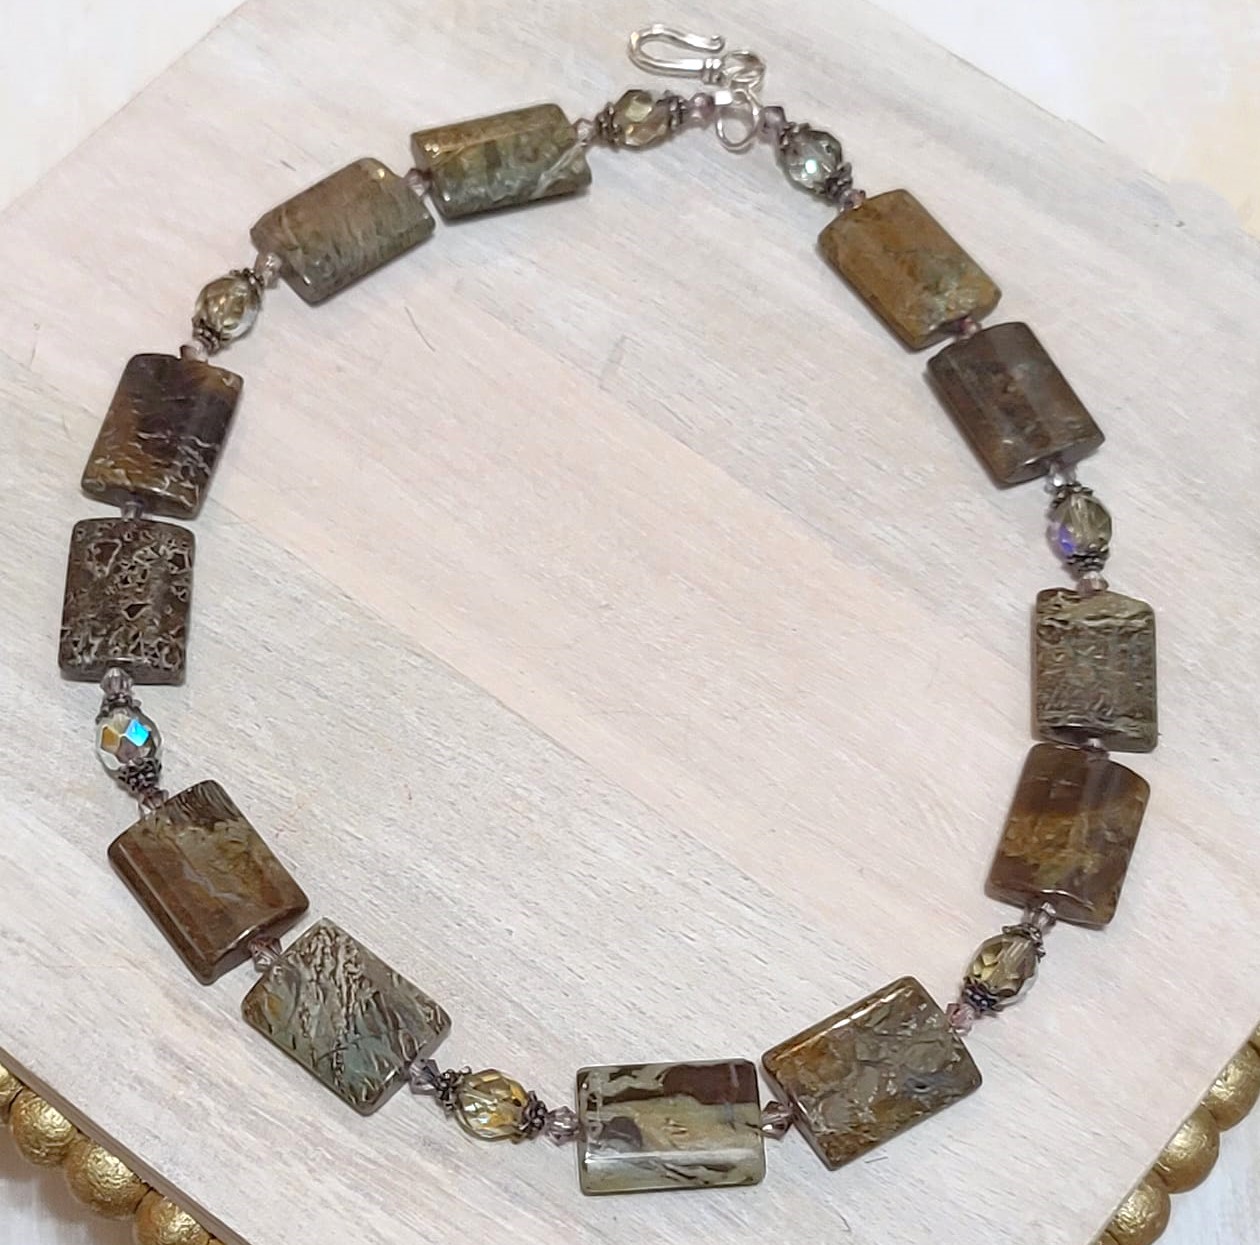 Gemstone link necklace, green jasper, austrian crystals, sterling silver spacers and clasp